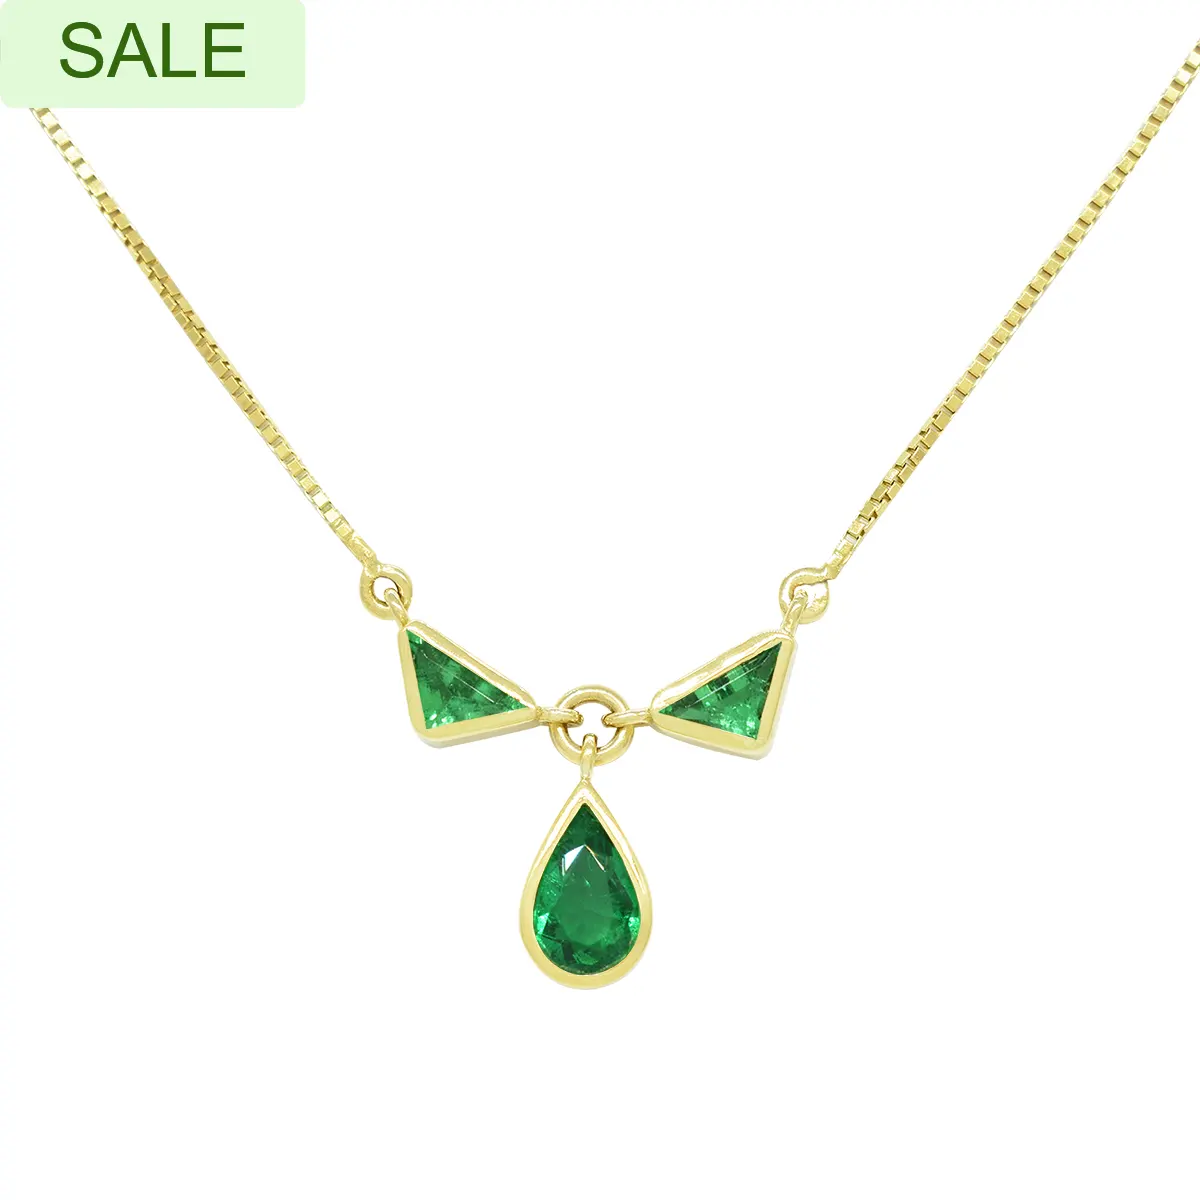 emerald-necklace-in-18k-yellow-gold-bezel-setting-triangle-and-pear-shape-emeralds